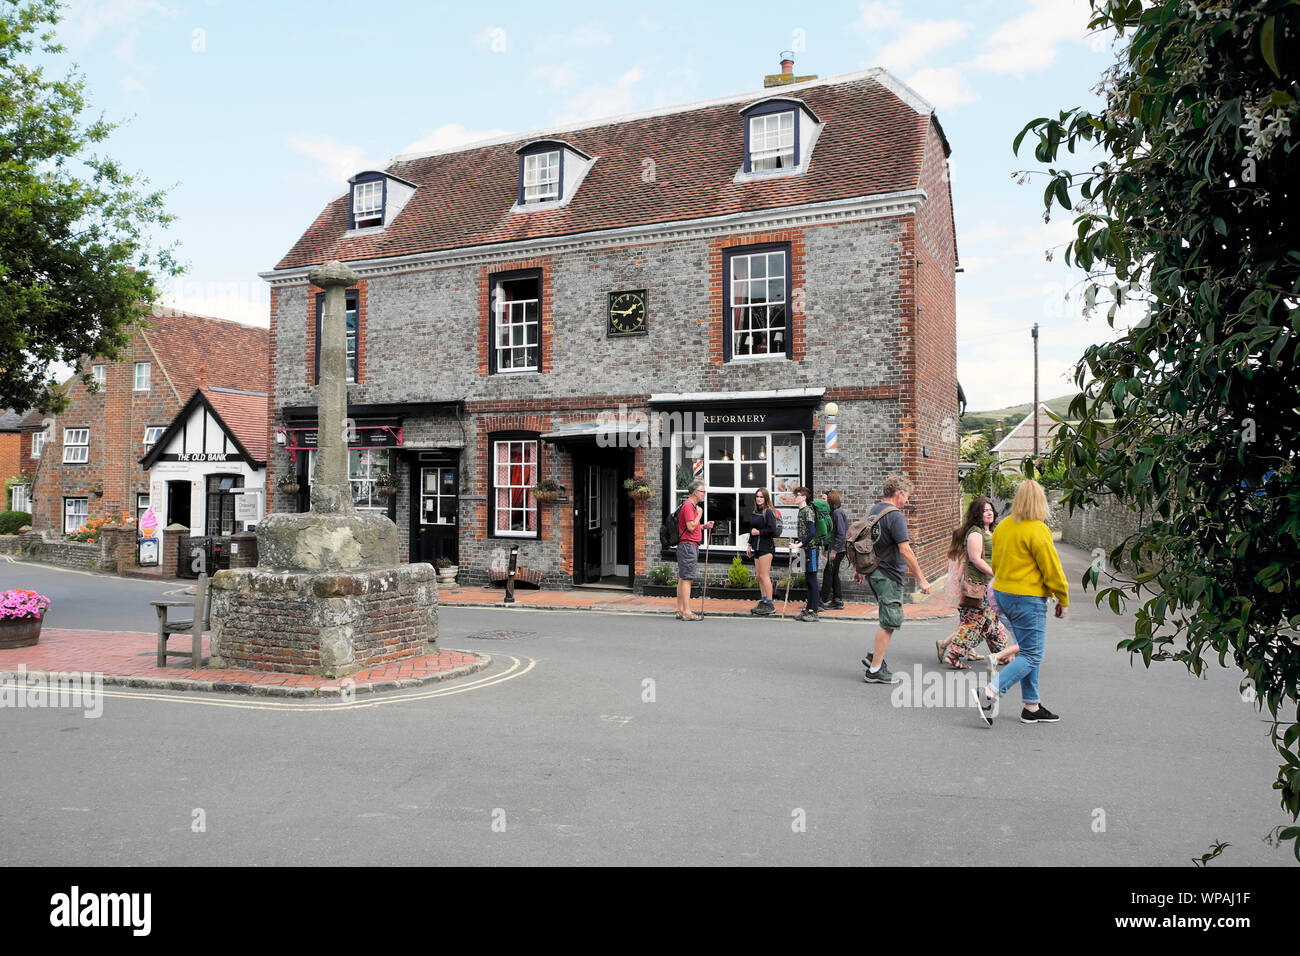 Shops, people tourists with rucksacks walking outside and view of the main high street in Alfriston Village in East Sussex, England, UK  KATHY DEWITT Stock Photo